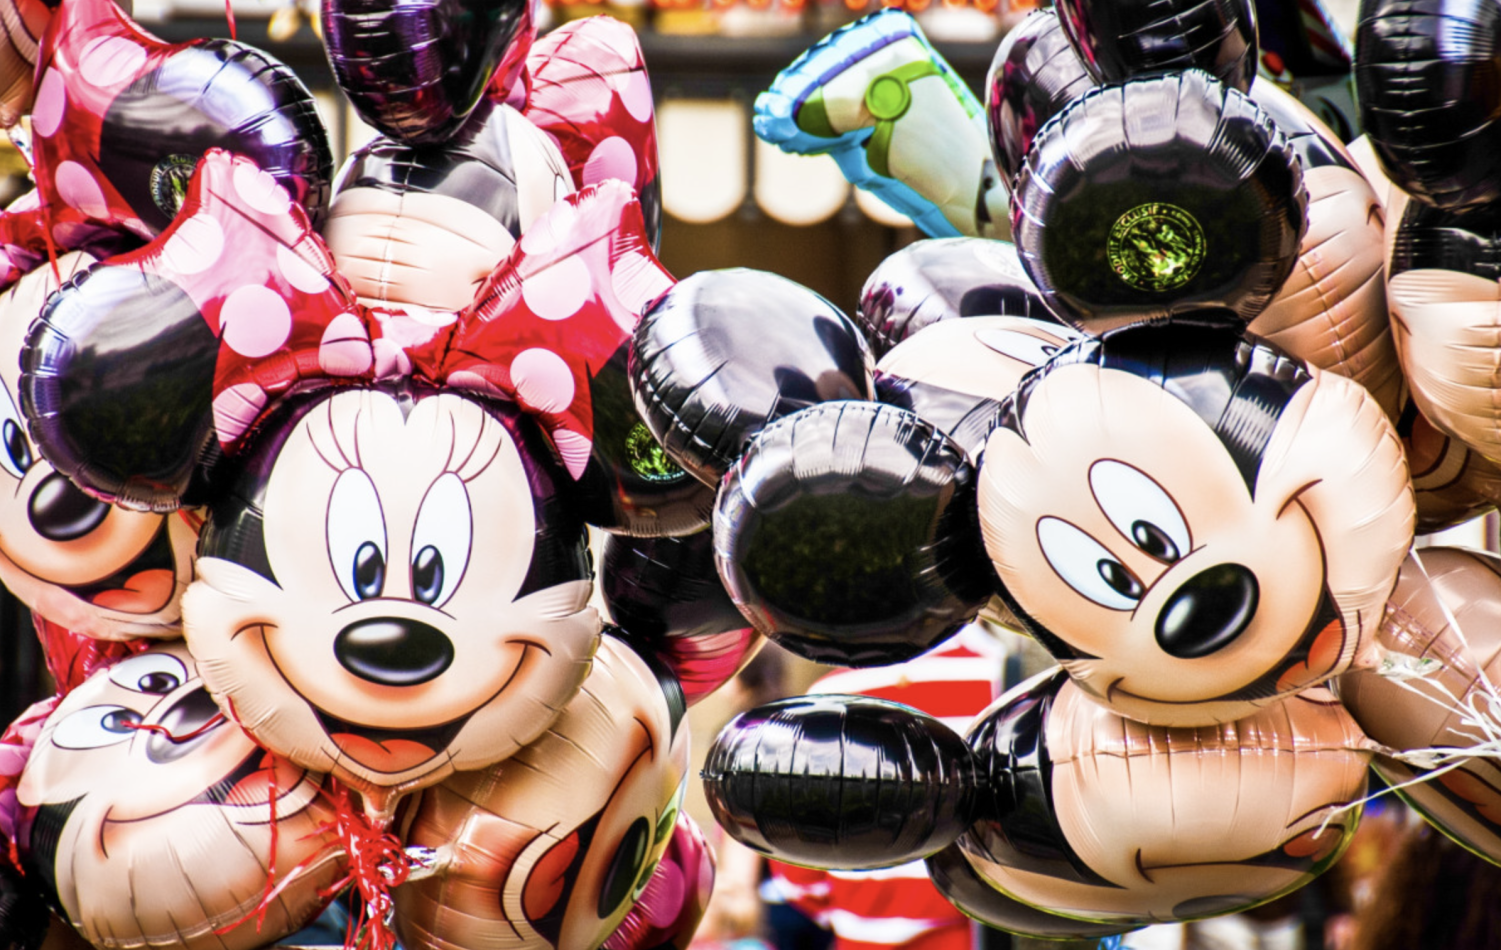 Will Content Creators Be Able To Use Mickey Mouse for Free?